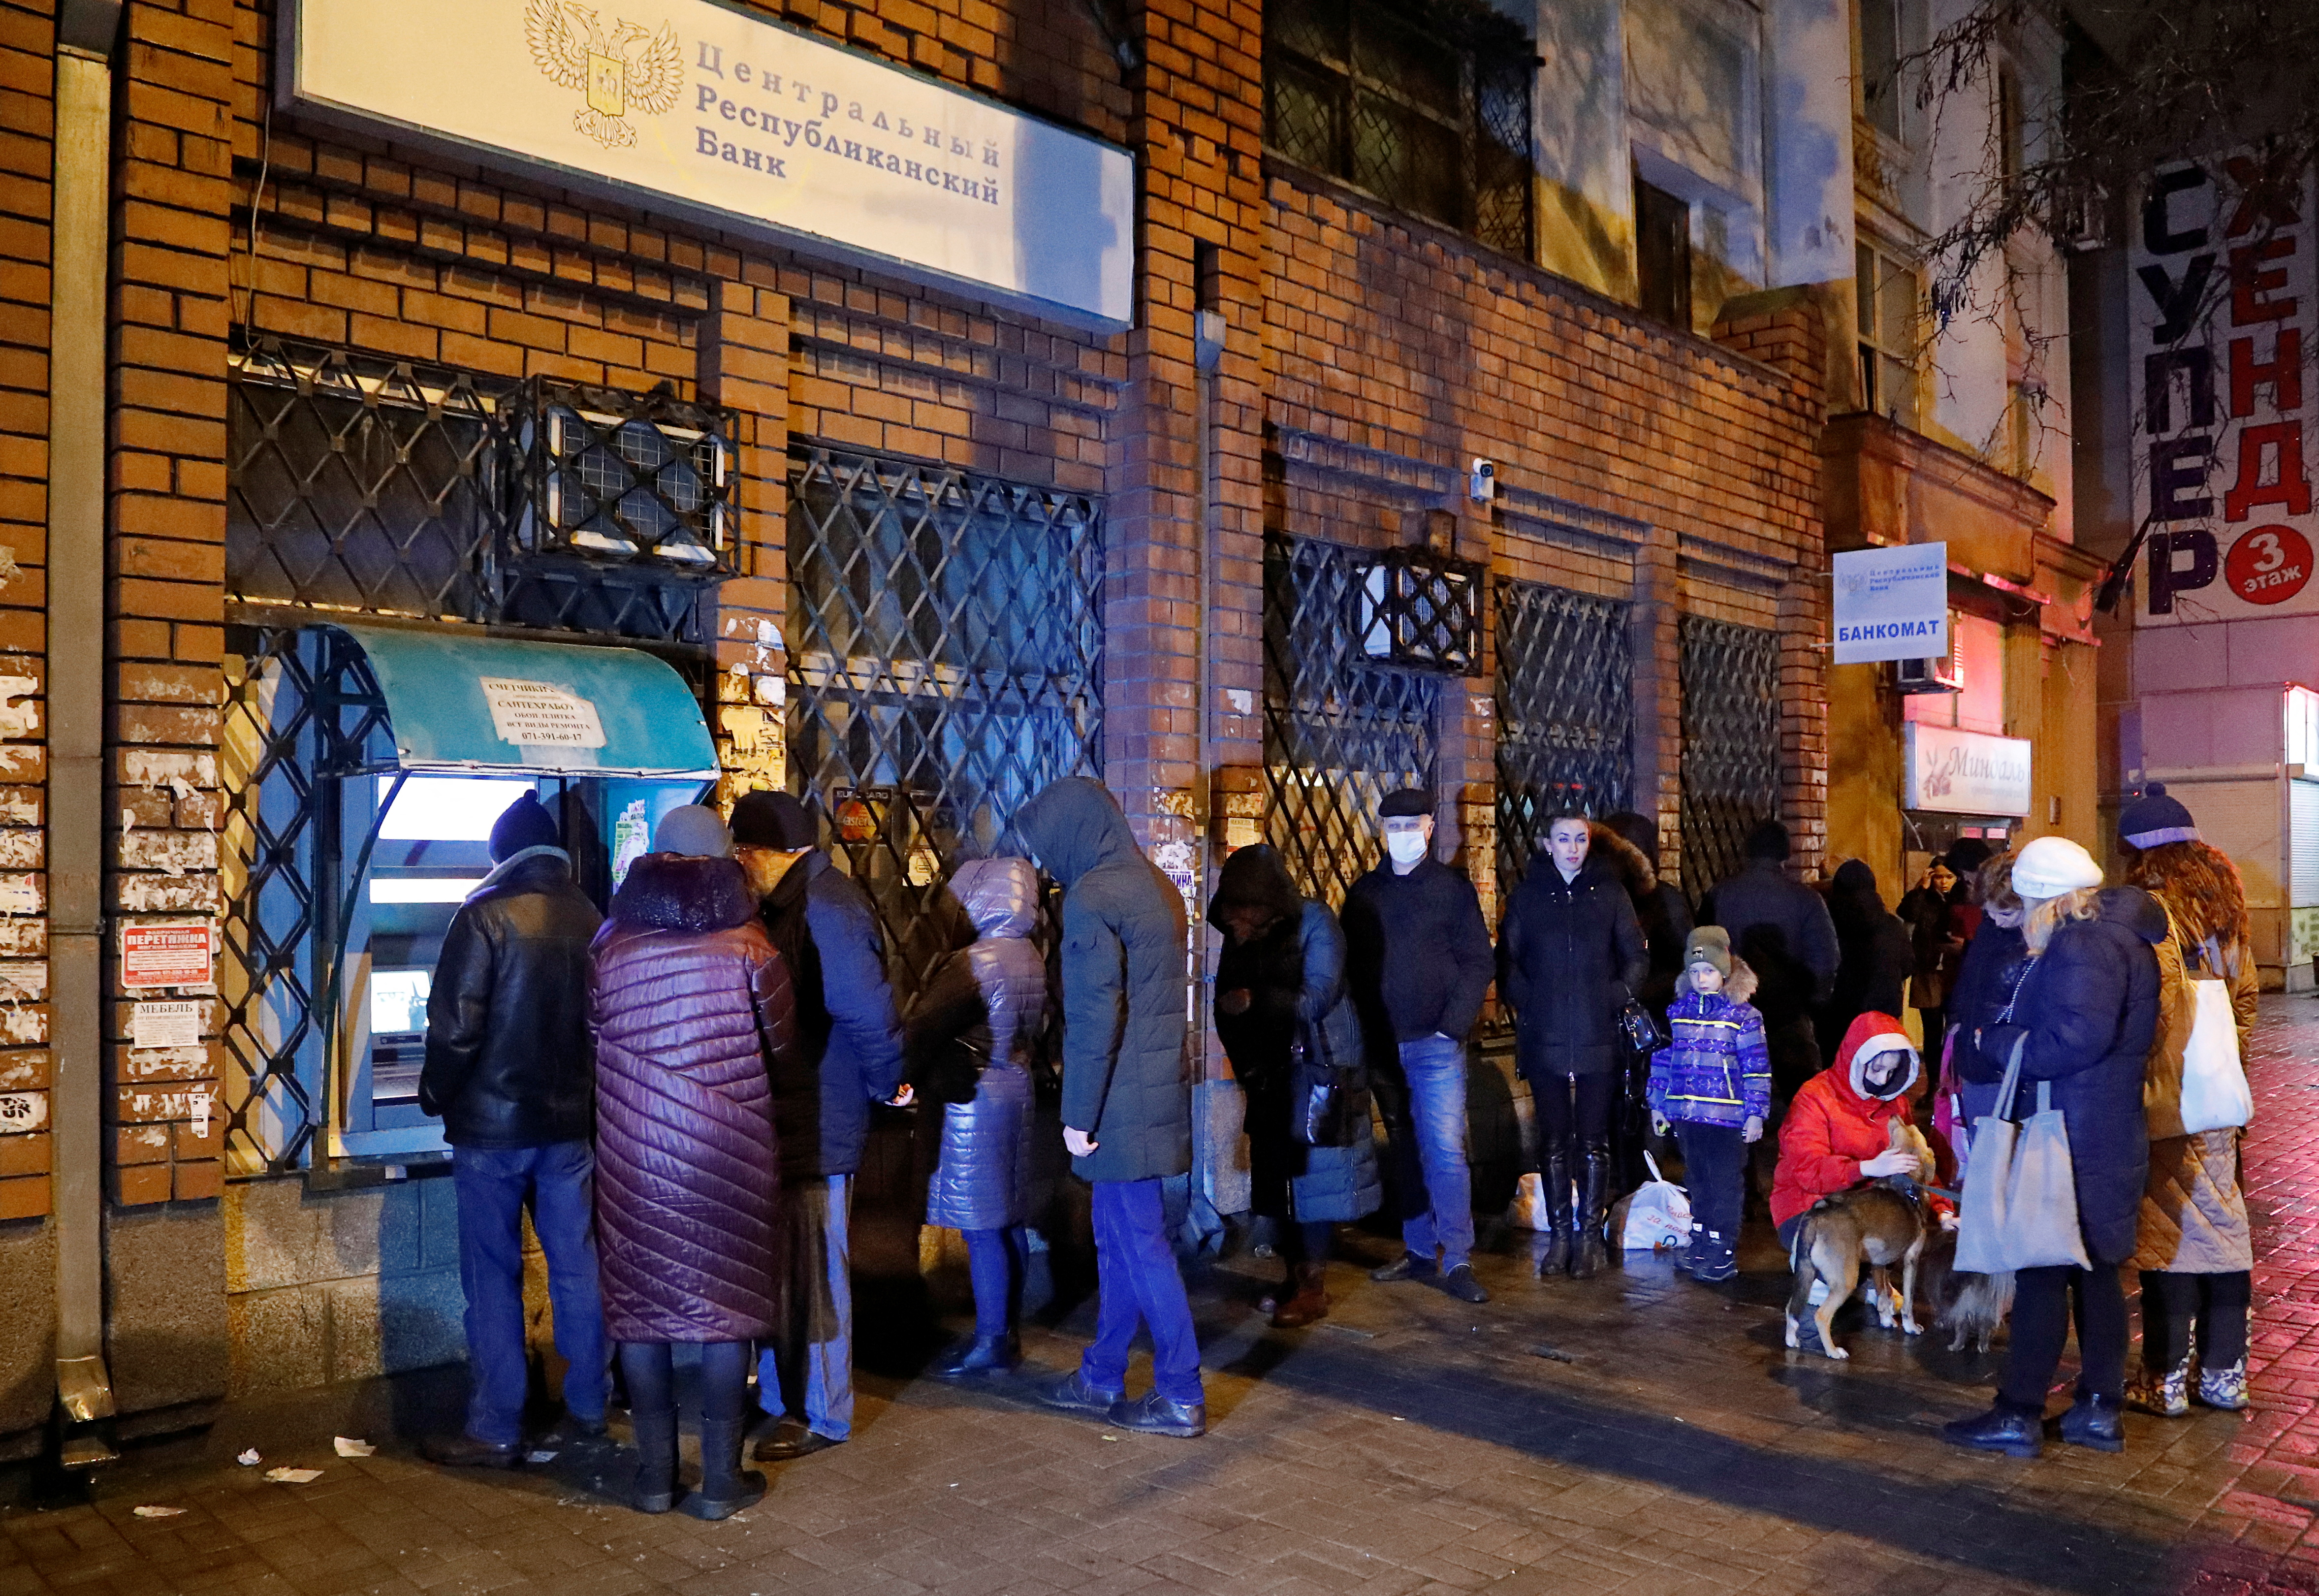 People stand in line to use an ATM cash machine in Donetsk